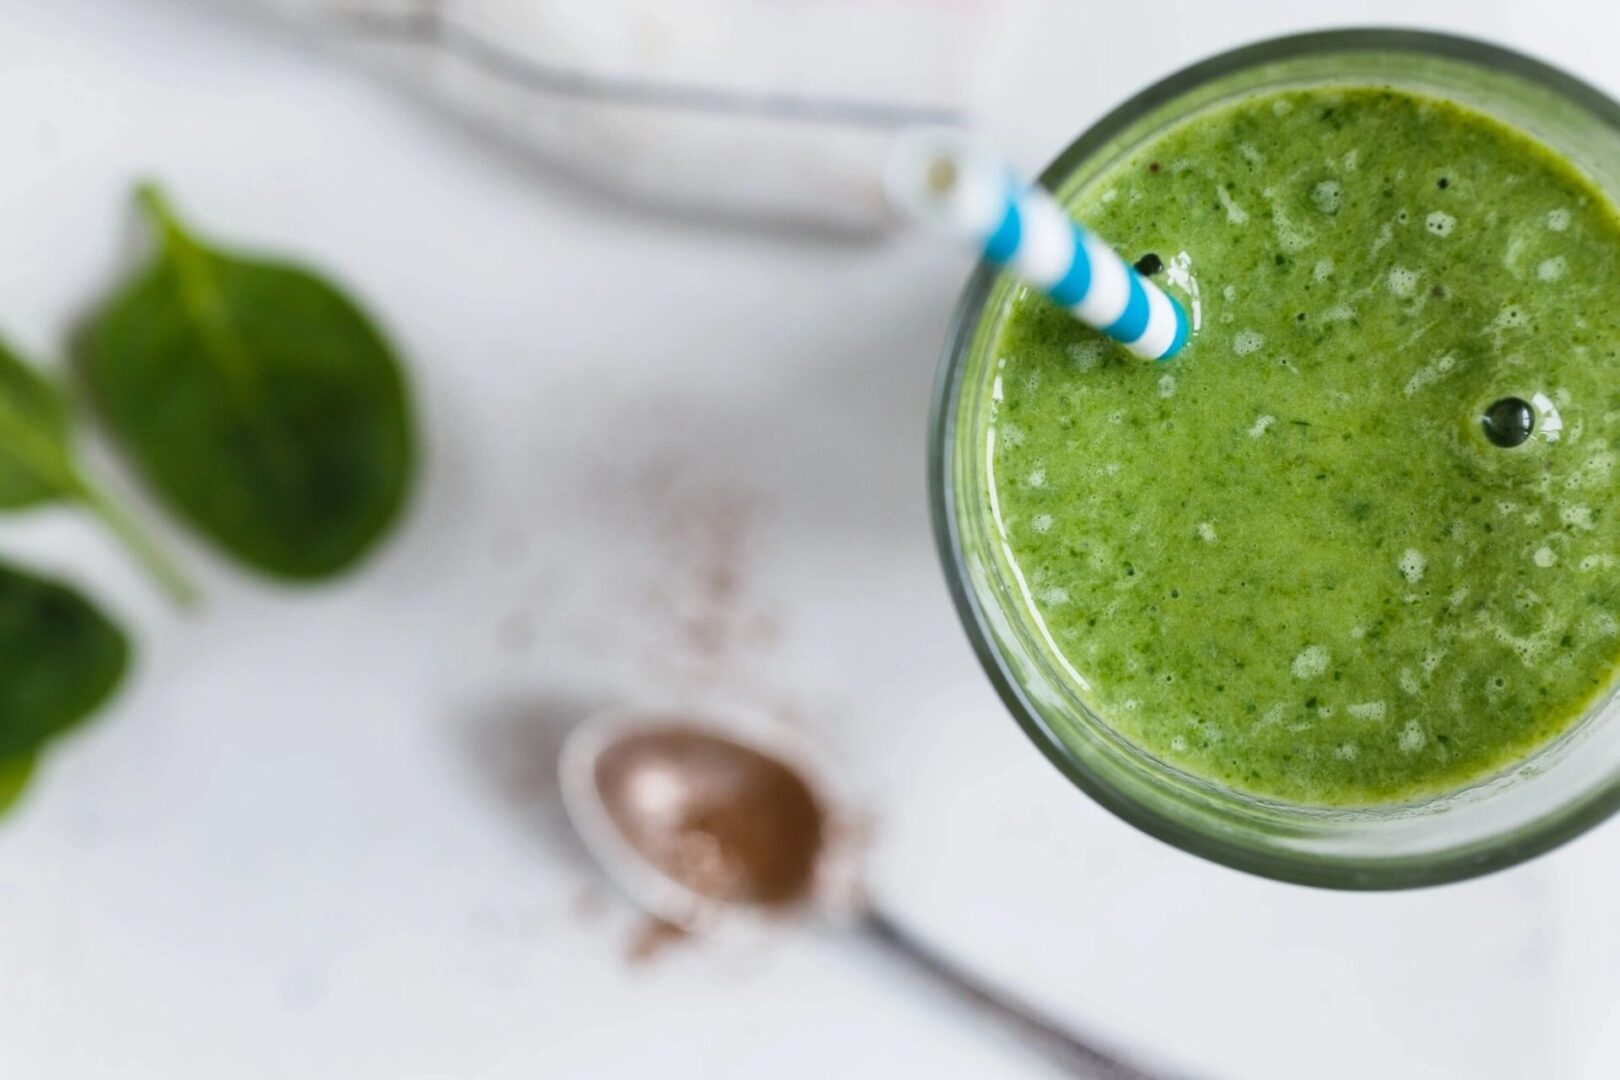 A green smoothie in a glass with a straw.